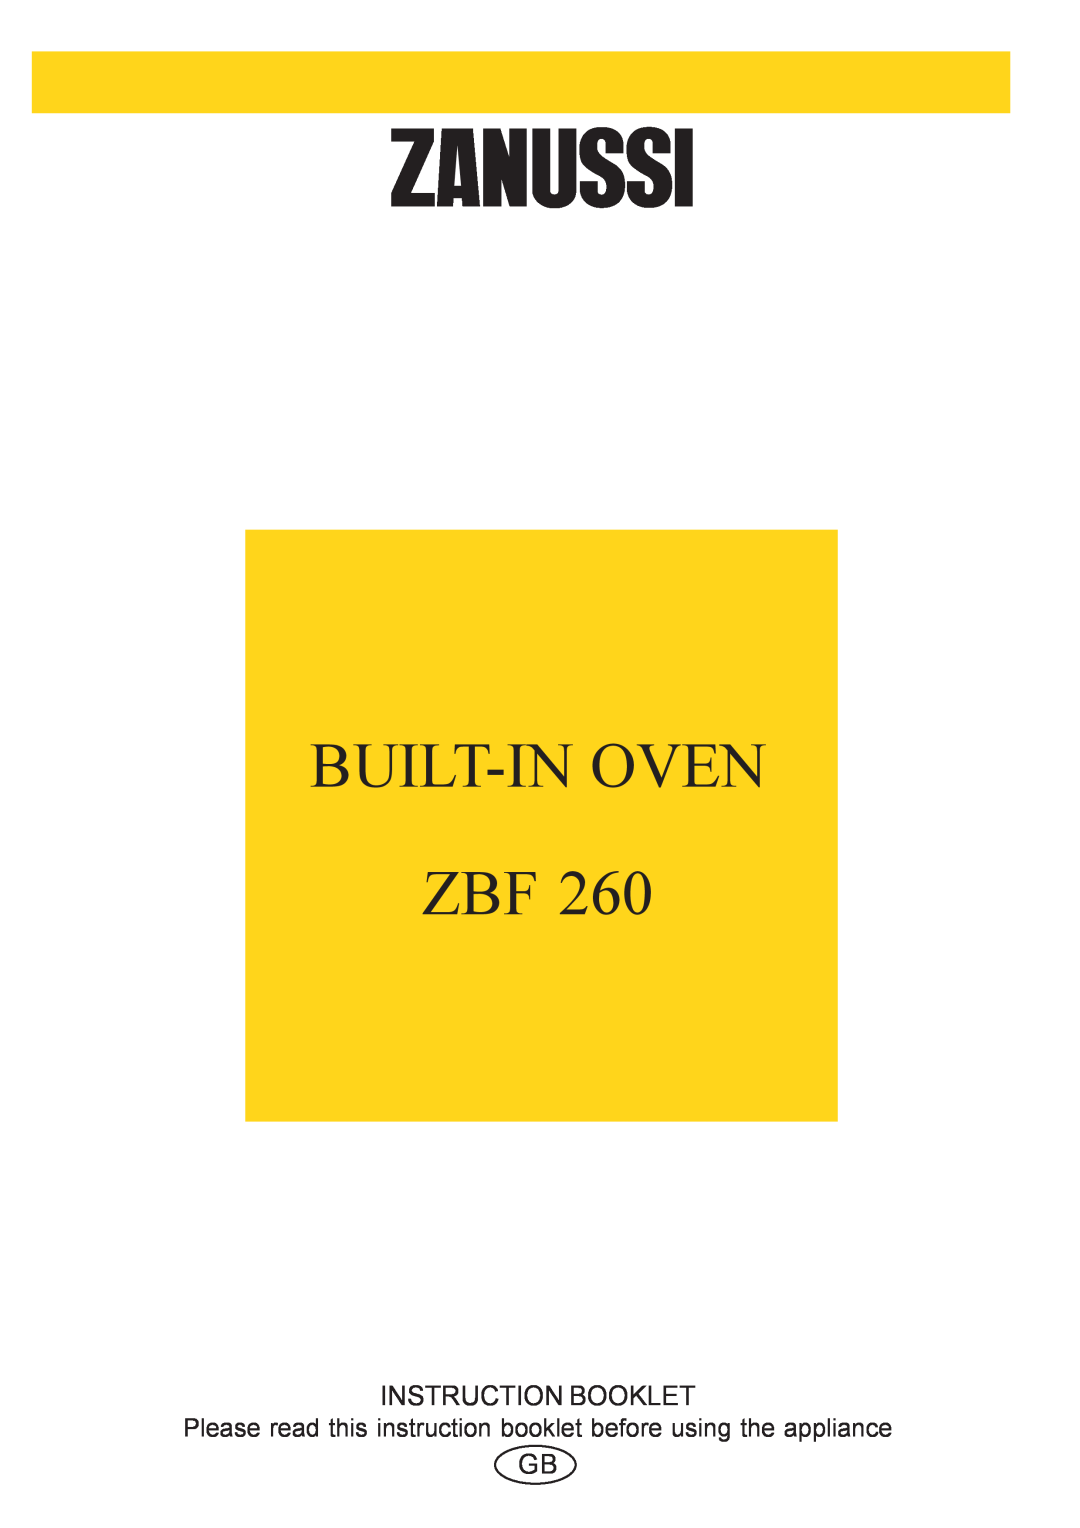 Zanussi ZBF 260 manual Please read this instruction booklet before using the appliance, Built-In Oven Zbf 